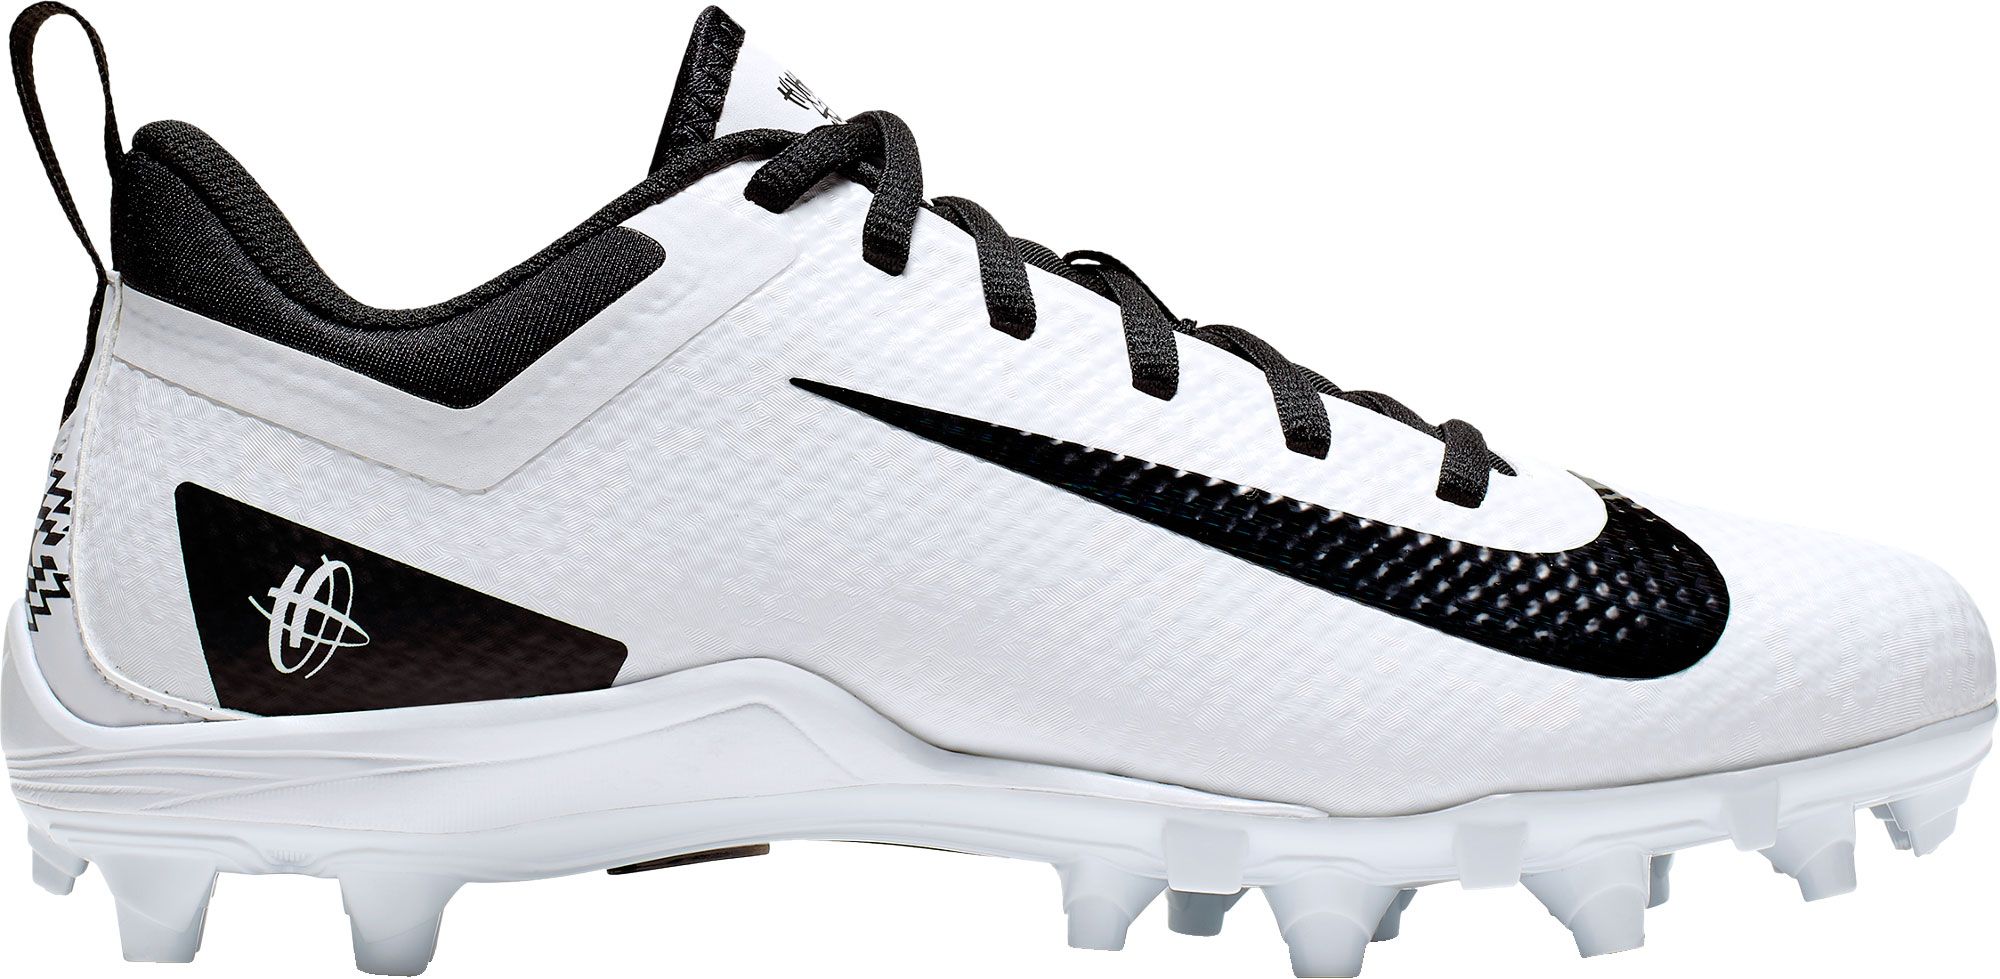 nike youth lacrosse cleats